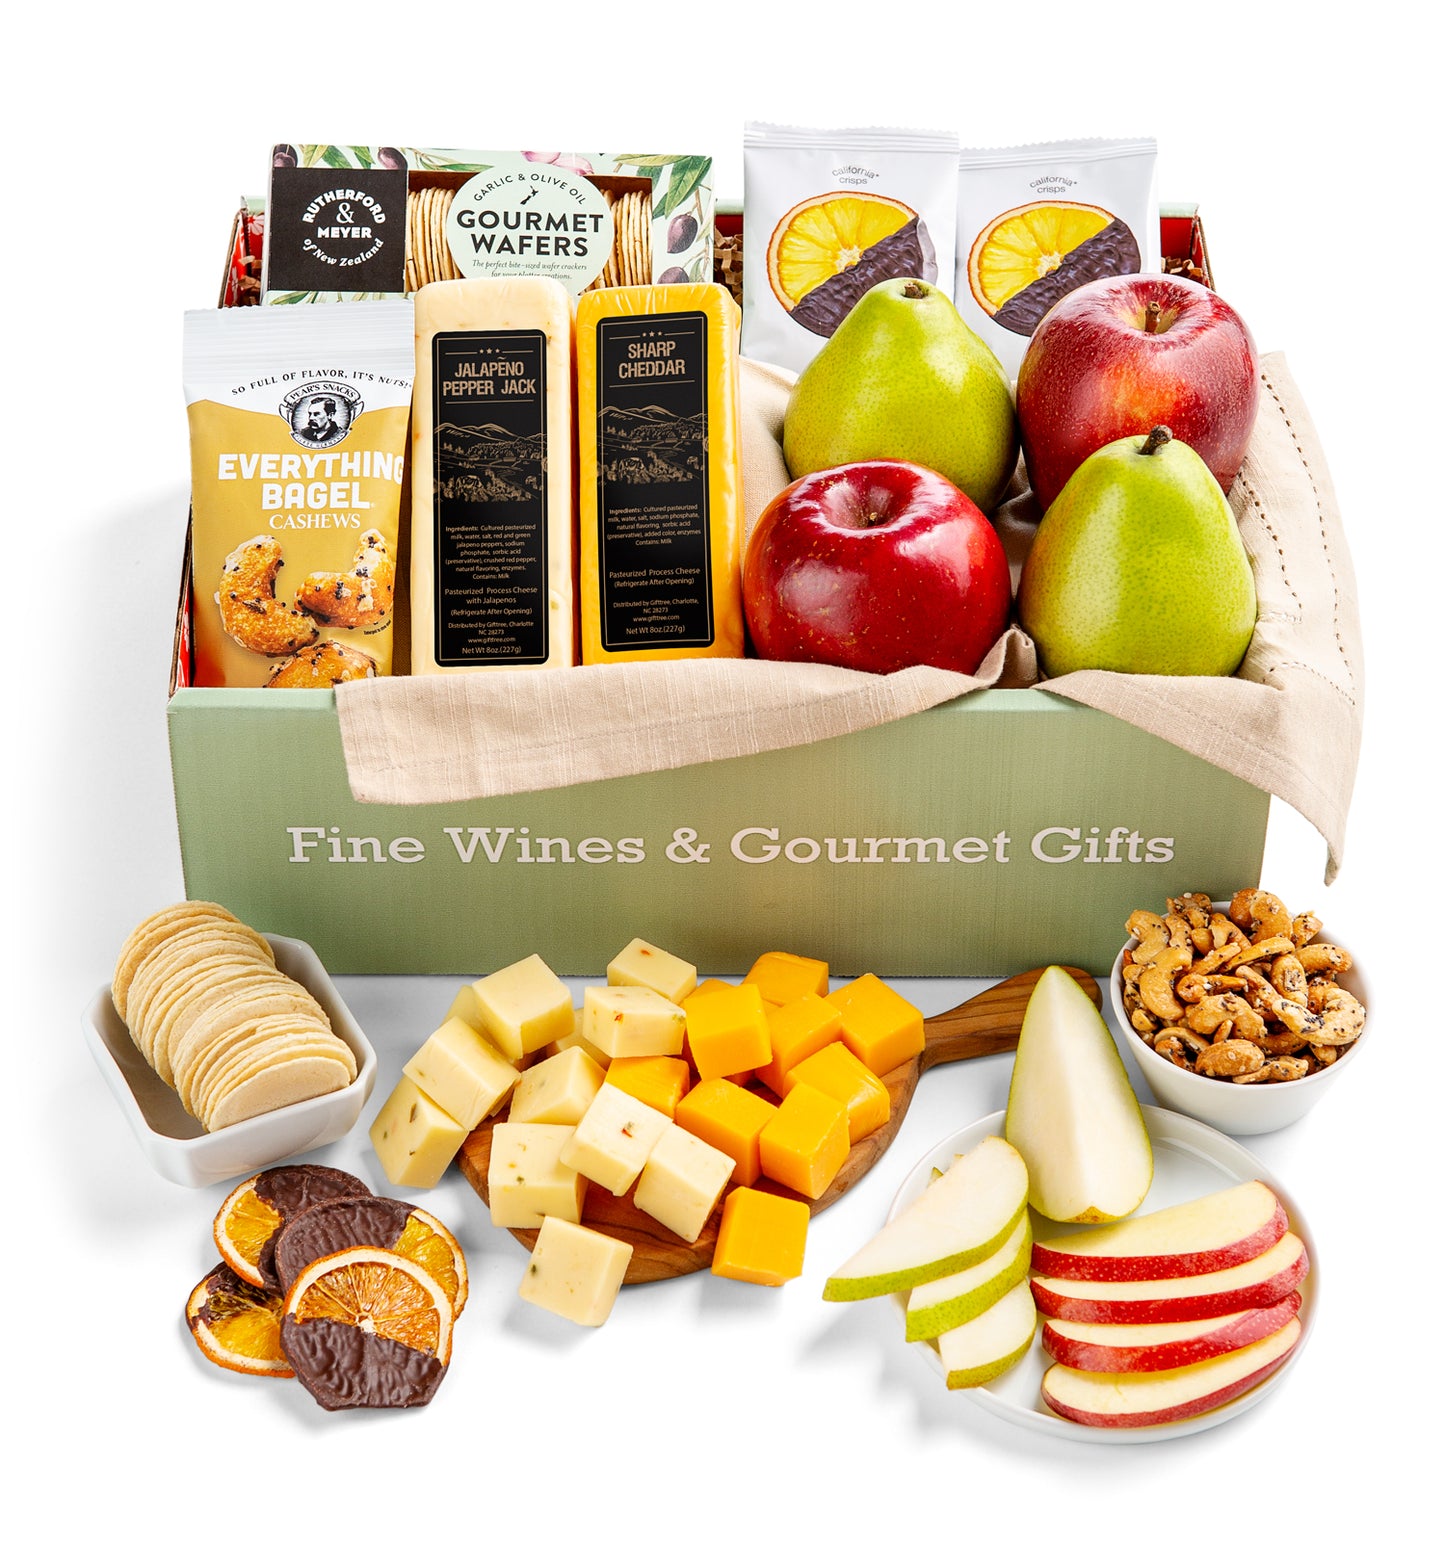 Taste of Europe Cheese Gift Crate, Cheese Appetizers